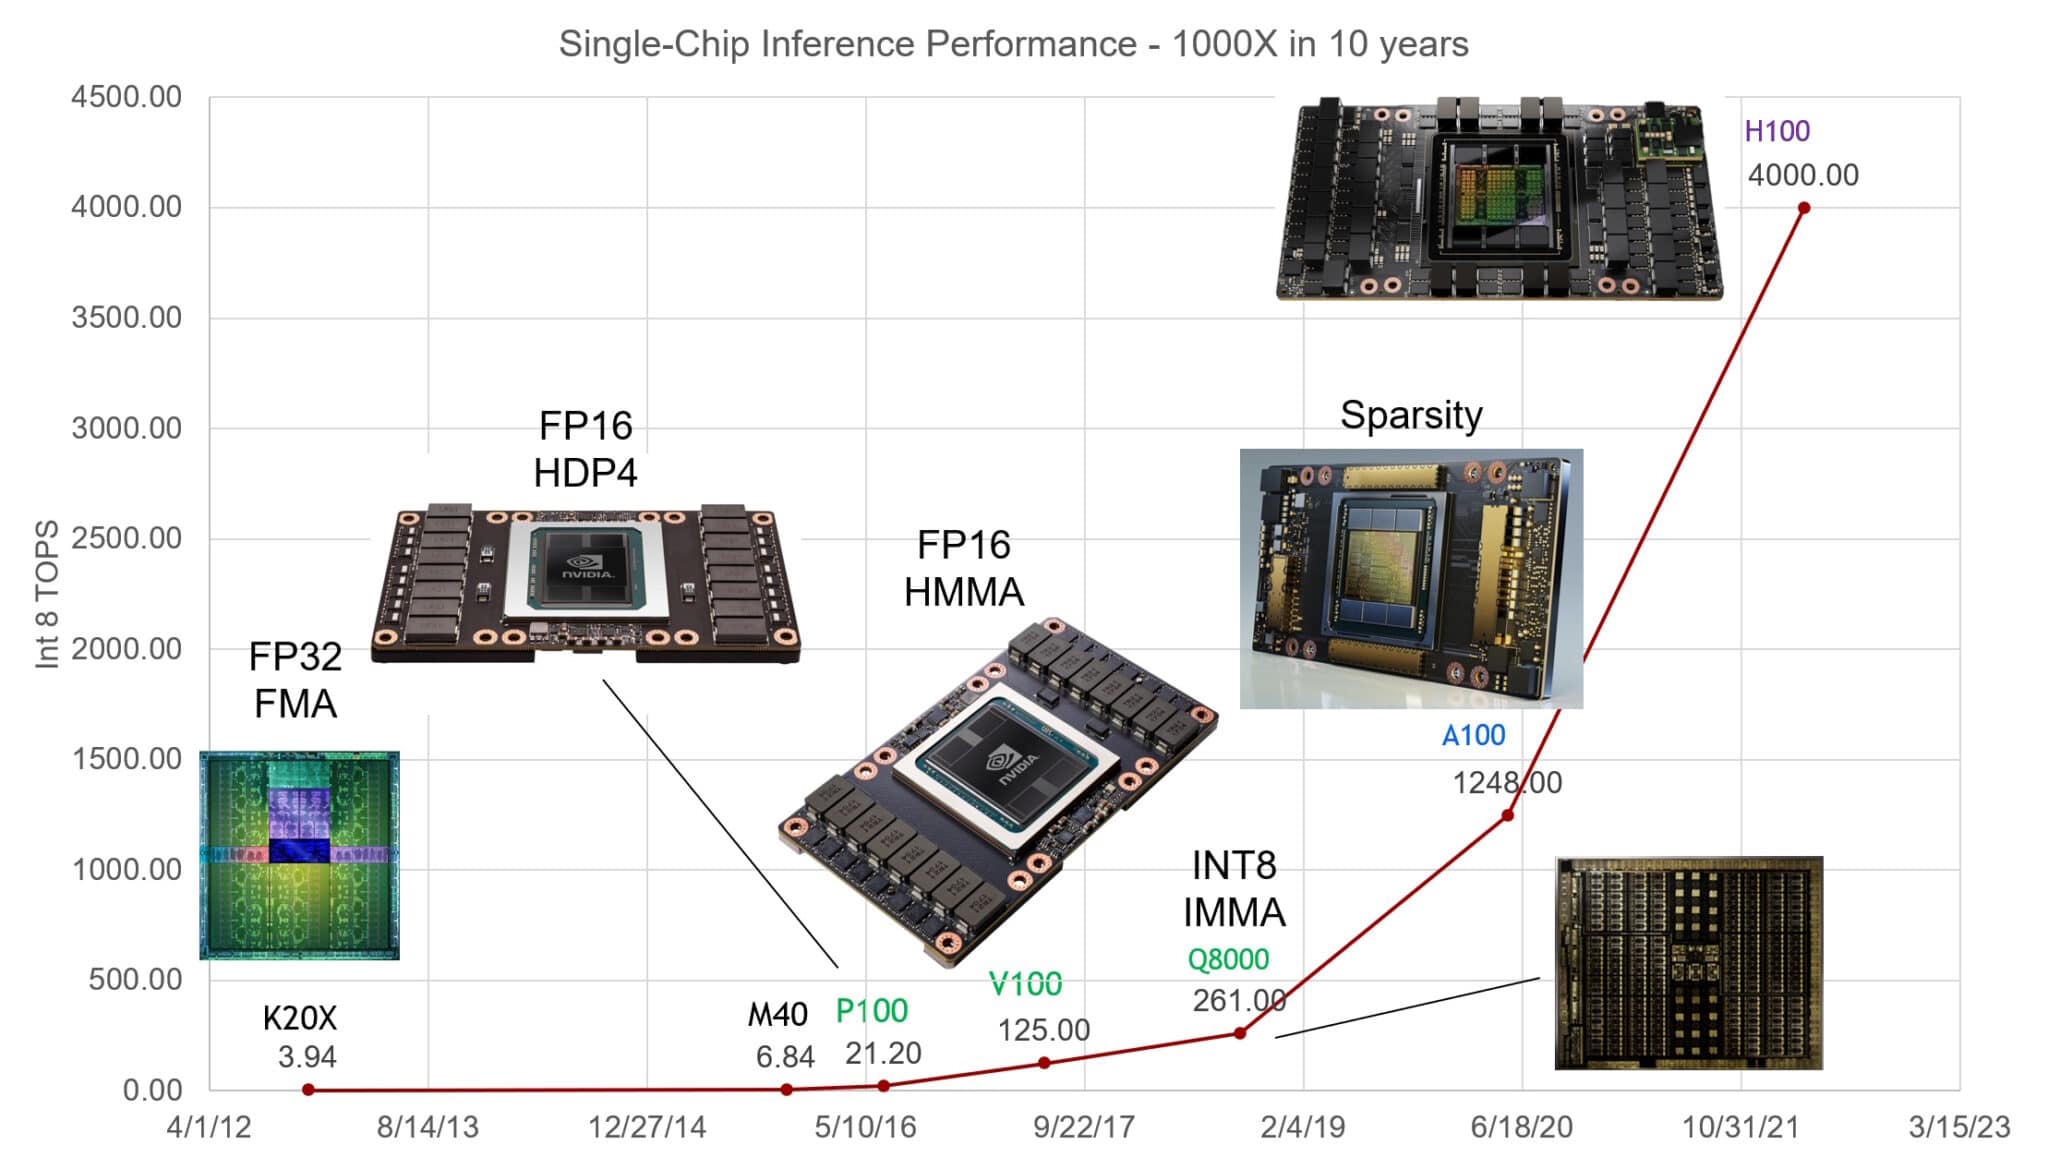 Chart shows 1,000x performance improvement on AI inference over a decade for single GPUs